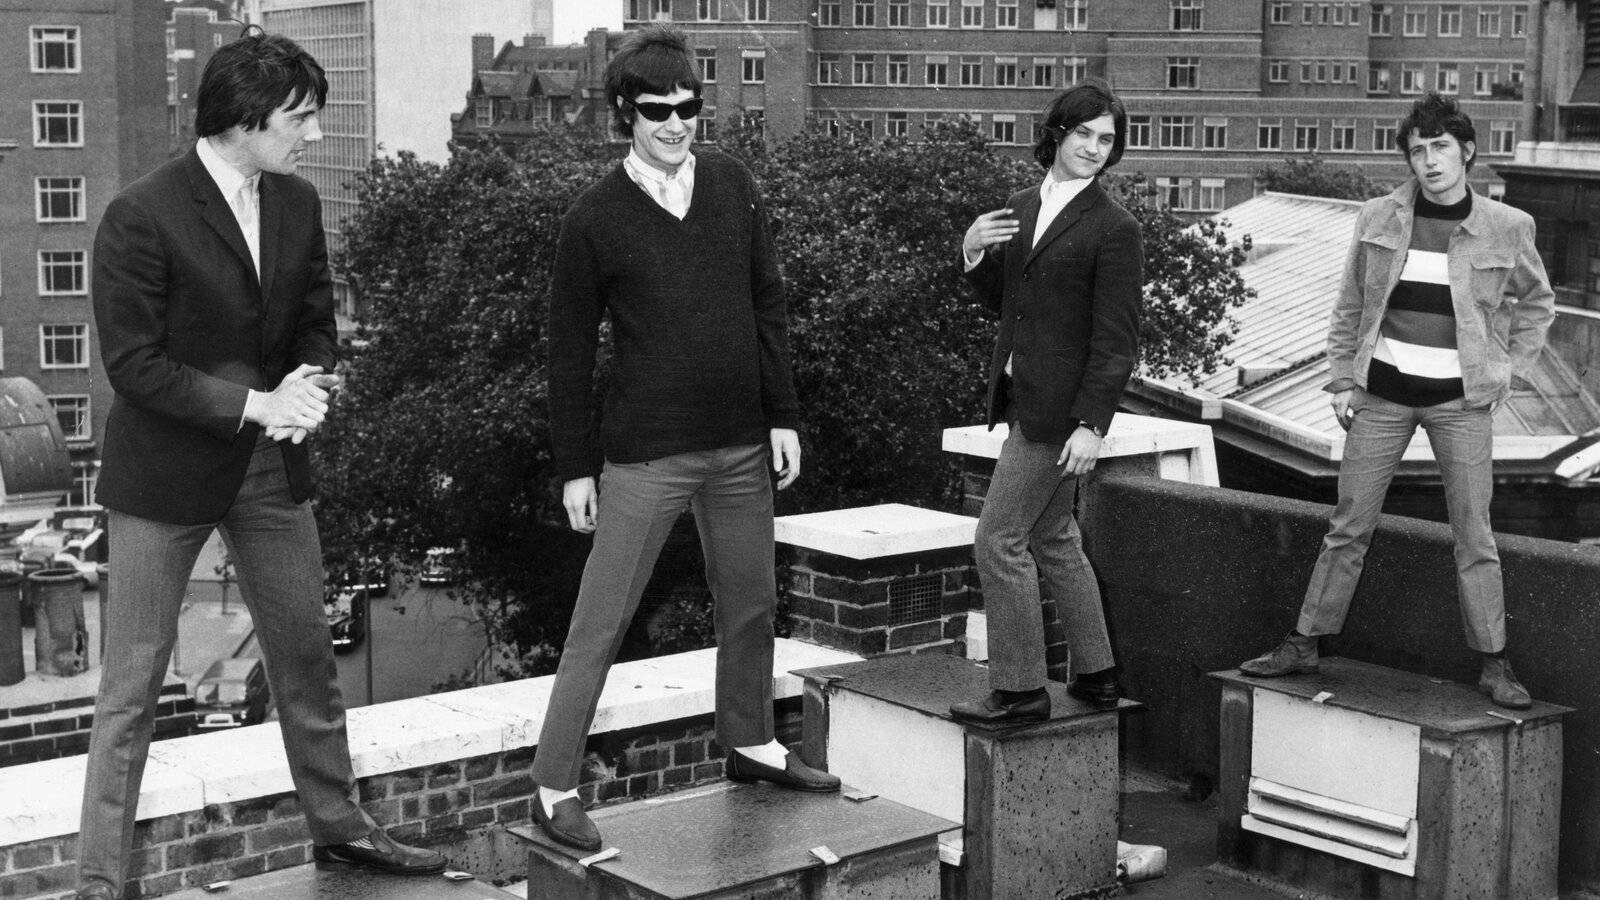 The Kinks On The Rooftop Wallpaper